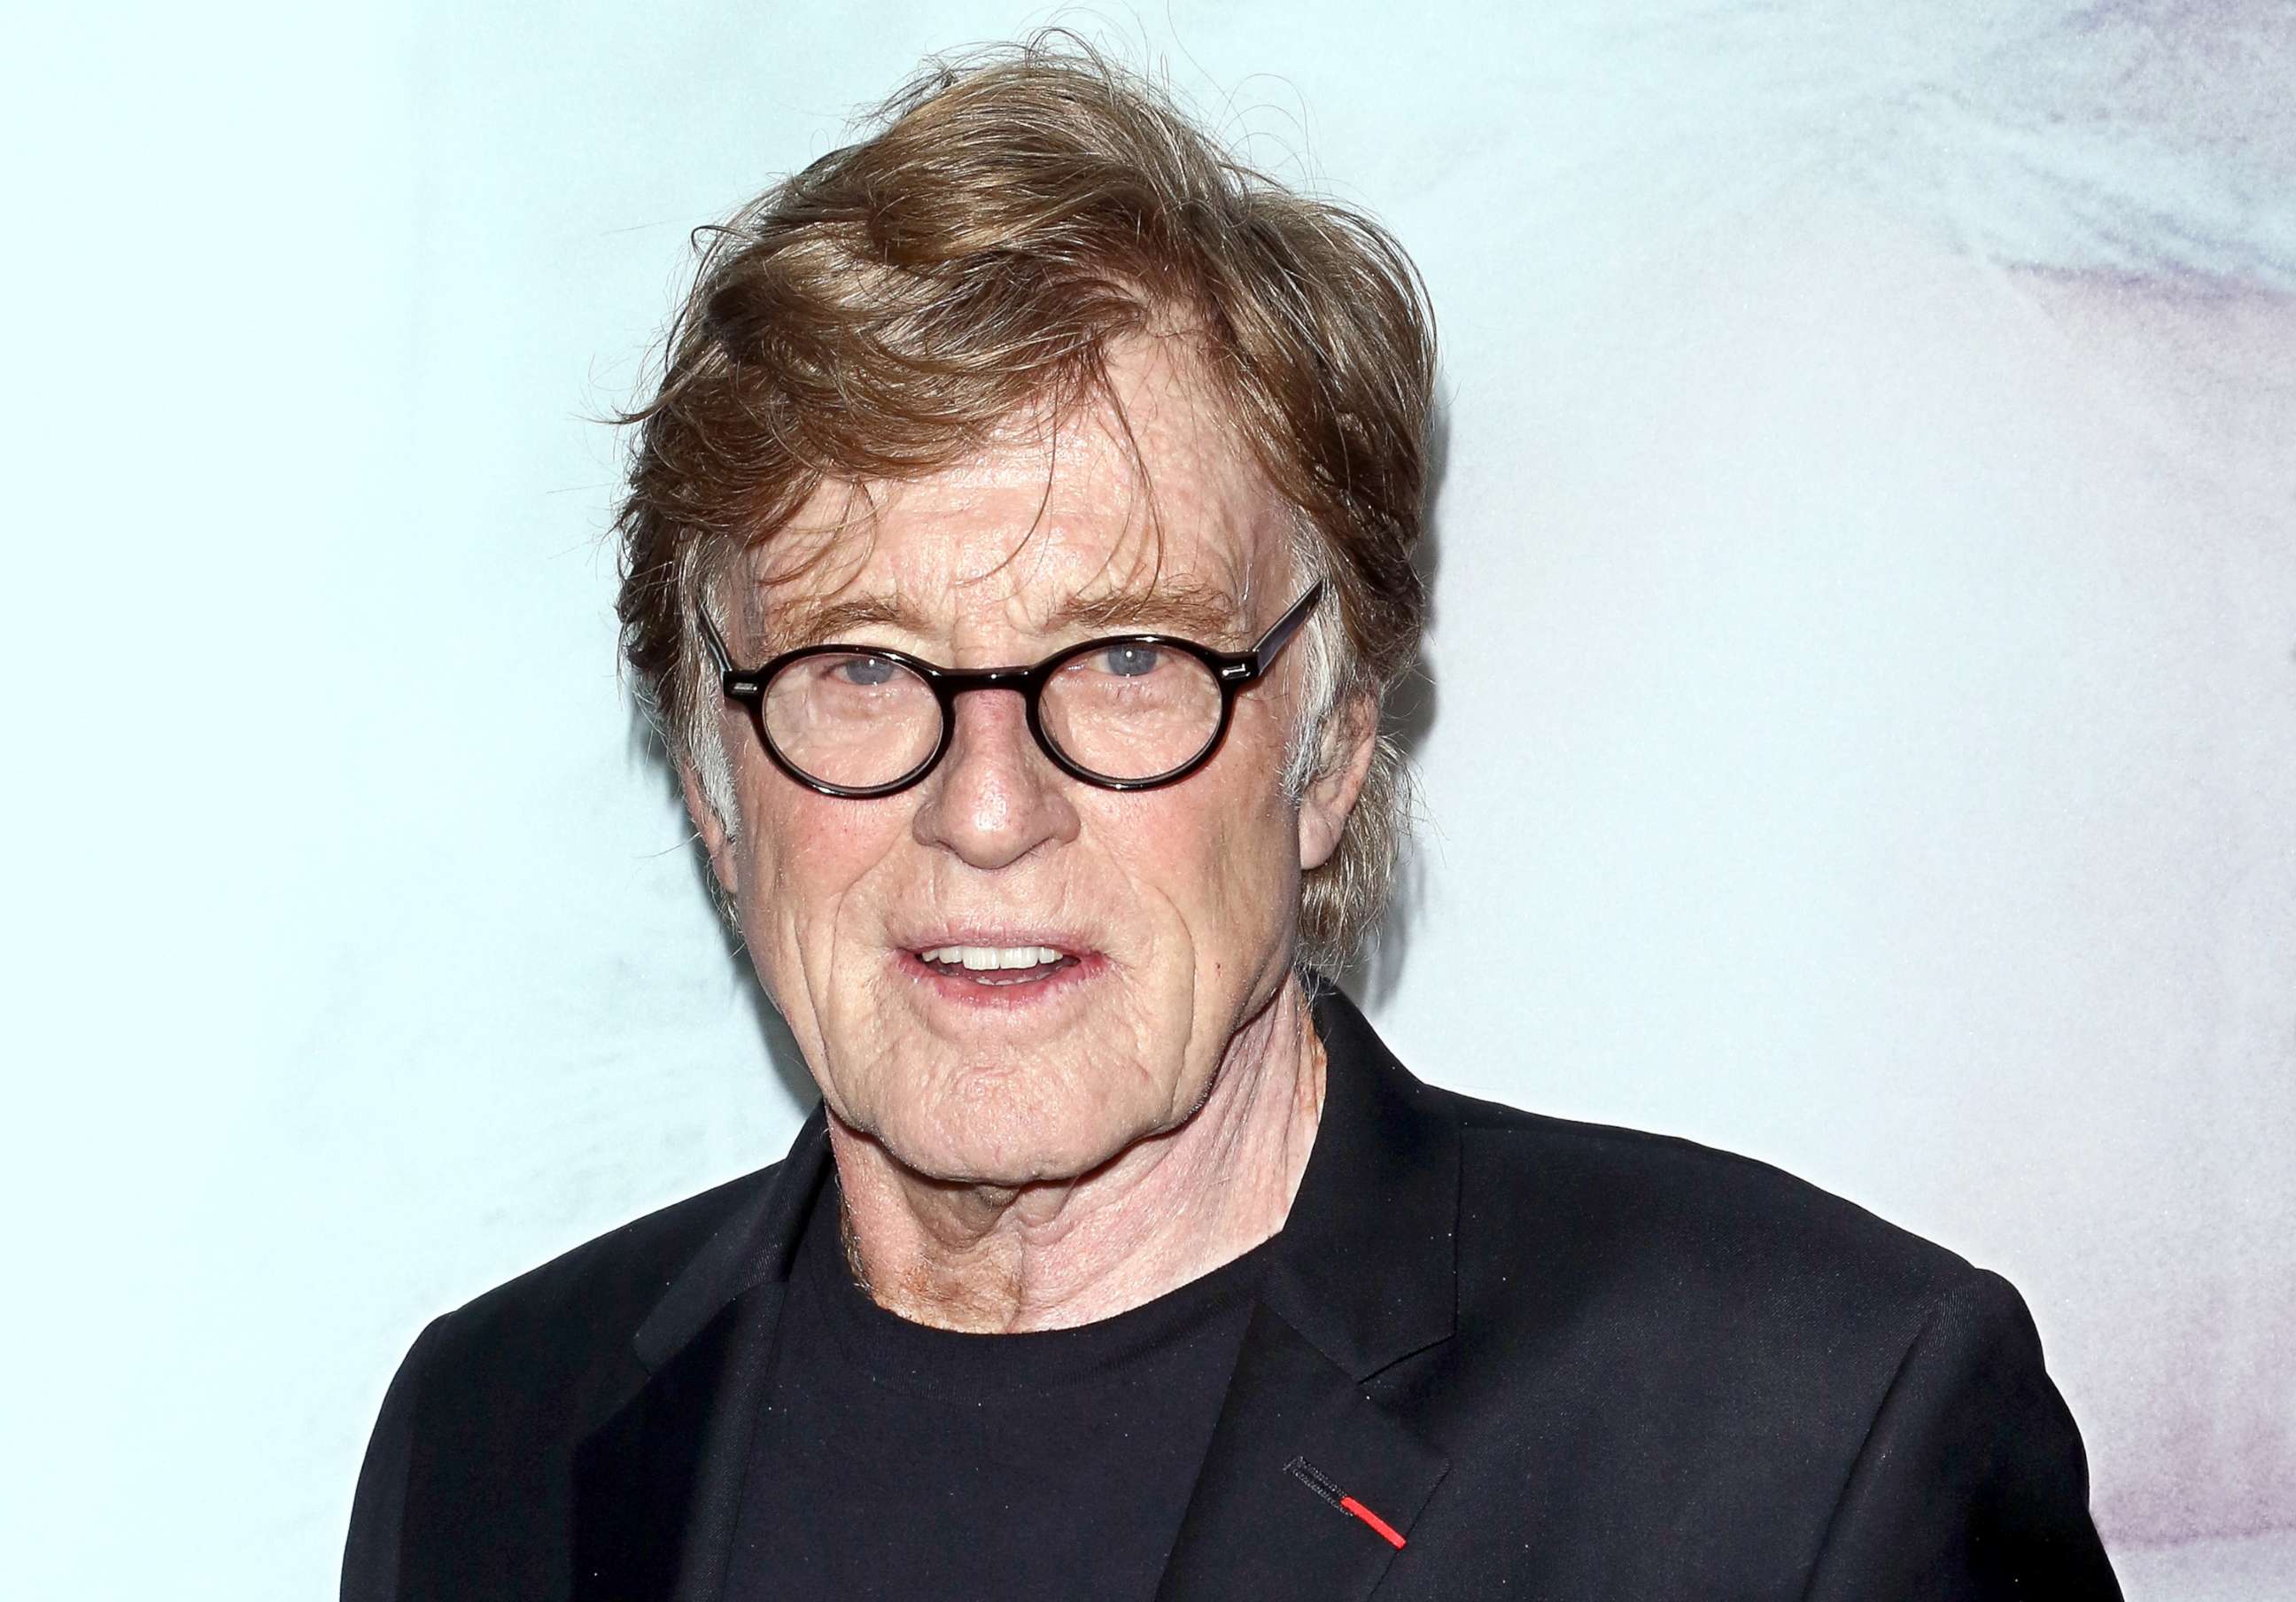 PHOTO: Actor/director/producer Robert Redford attends the New York premiere of "Our Souls at Night" at the Museum of Modern Art, Sept. 27, 2017, in New York City.